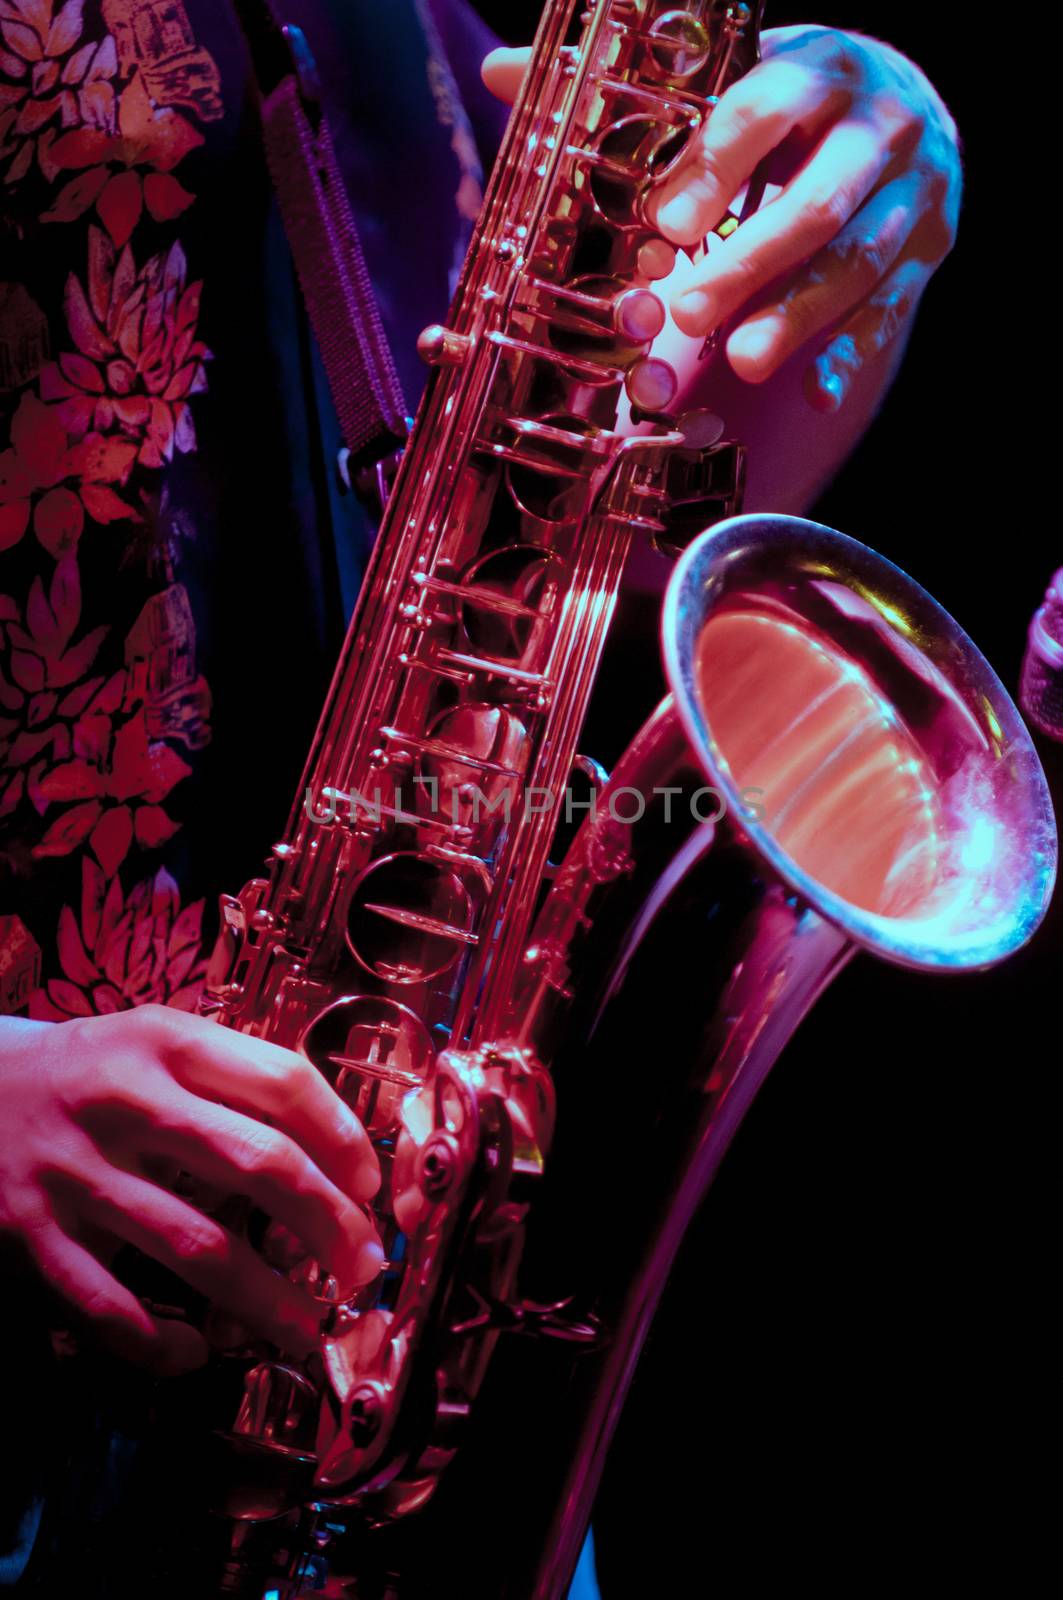 saxophone player in live perfomance by vangelis